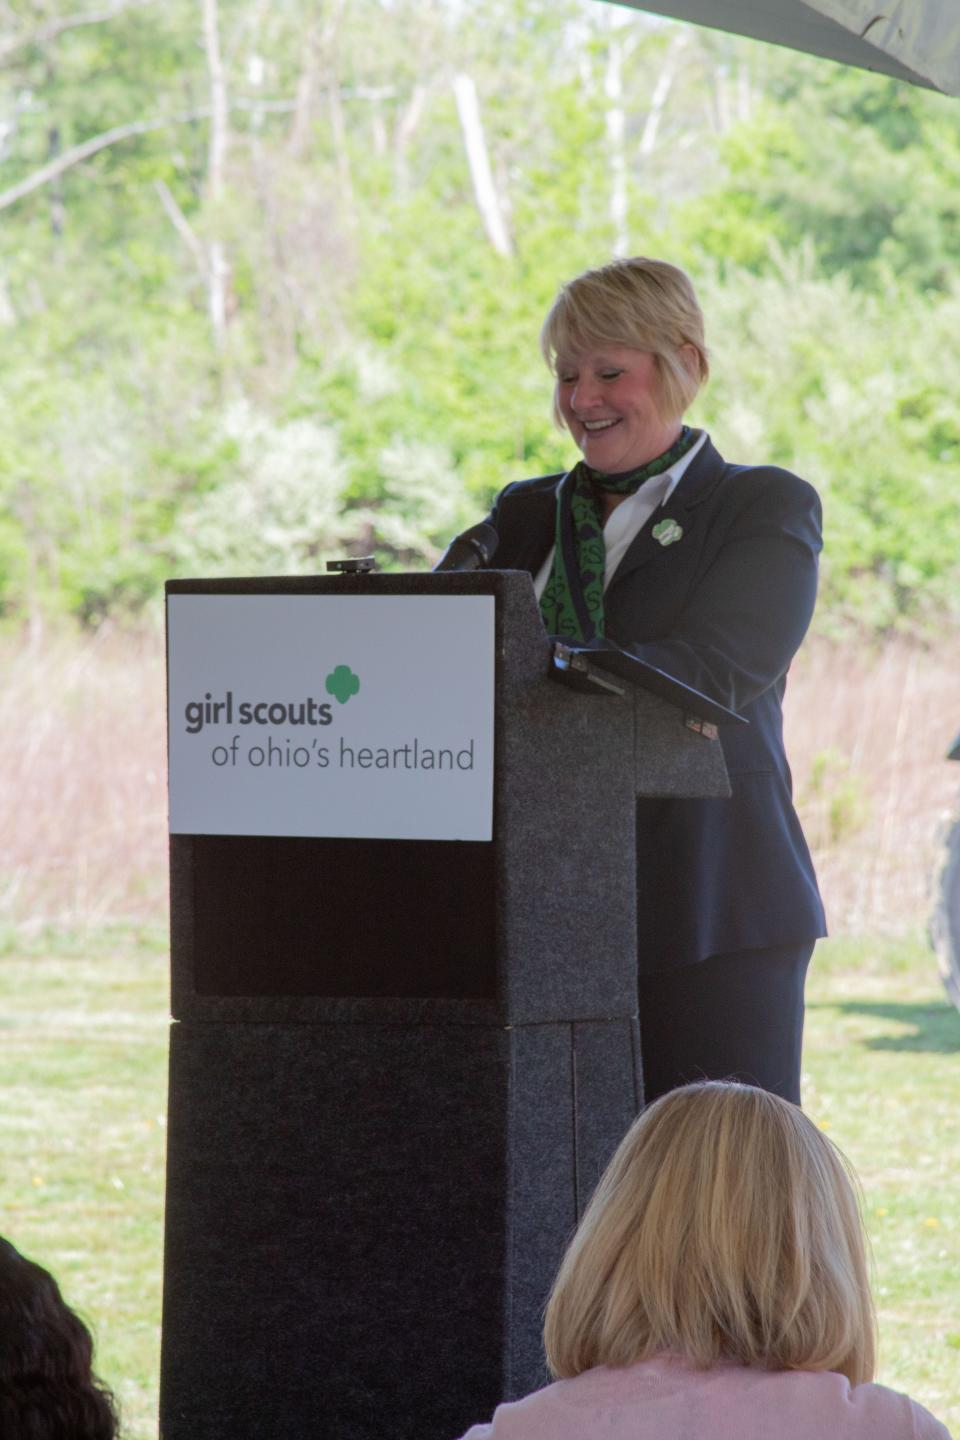 Tammy Wharton, president and CEO of the Girl Scouts of Ohio's Heartland, speaks at the May 9, 2023 ground breaking celebration for the new STEM Leadership Center & Maker Space in Galloway.